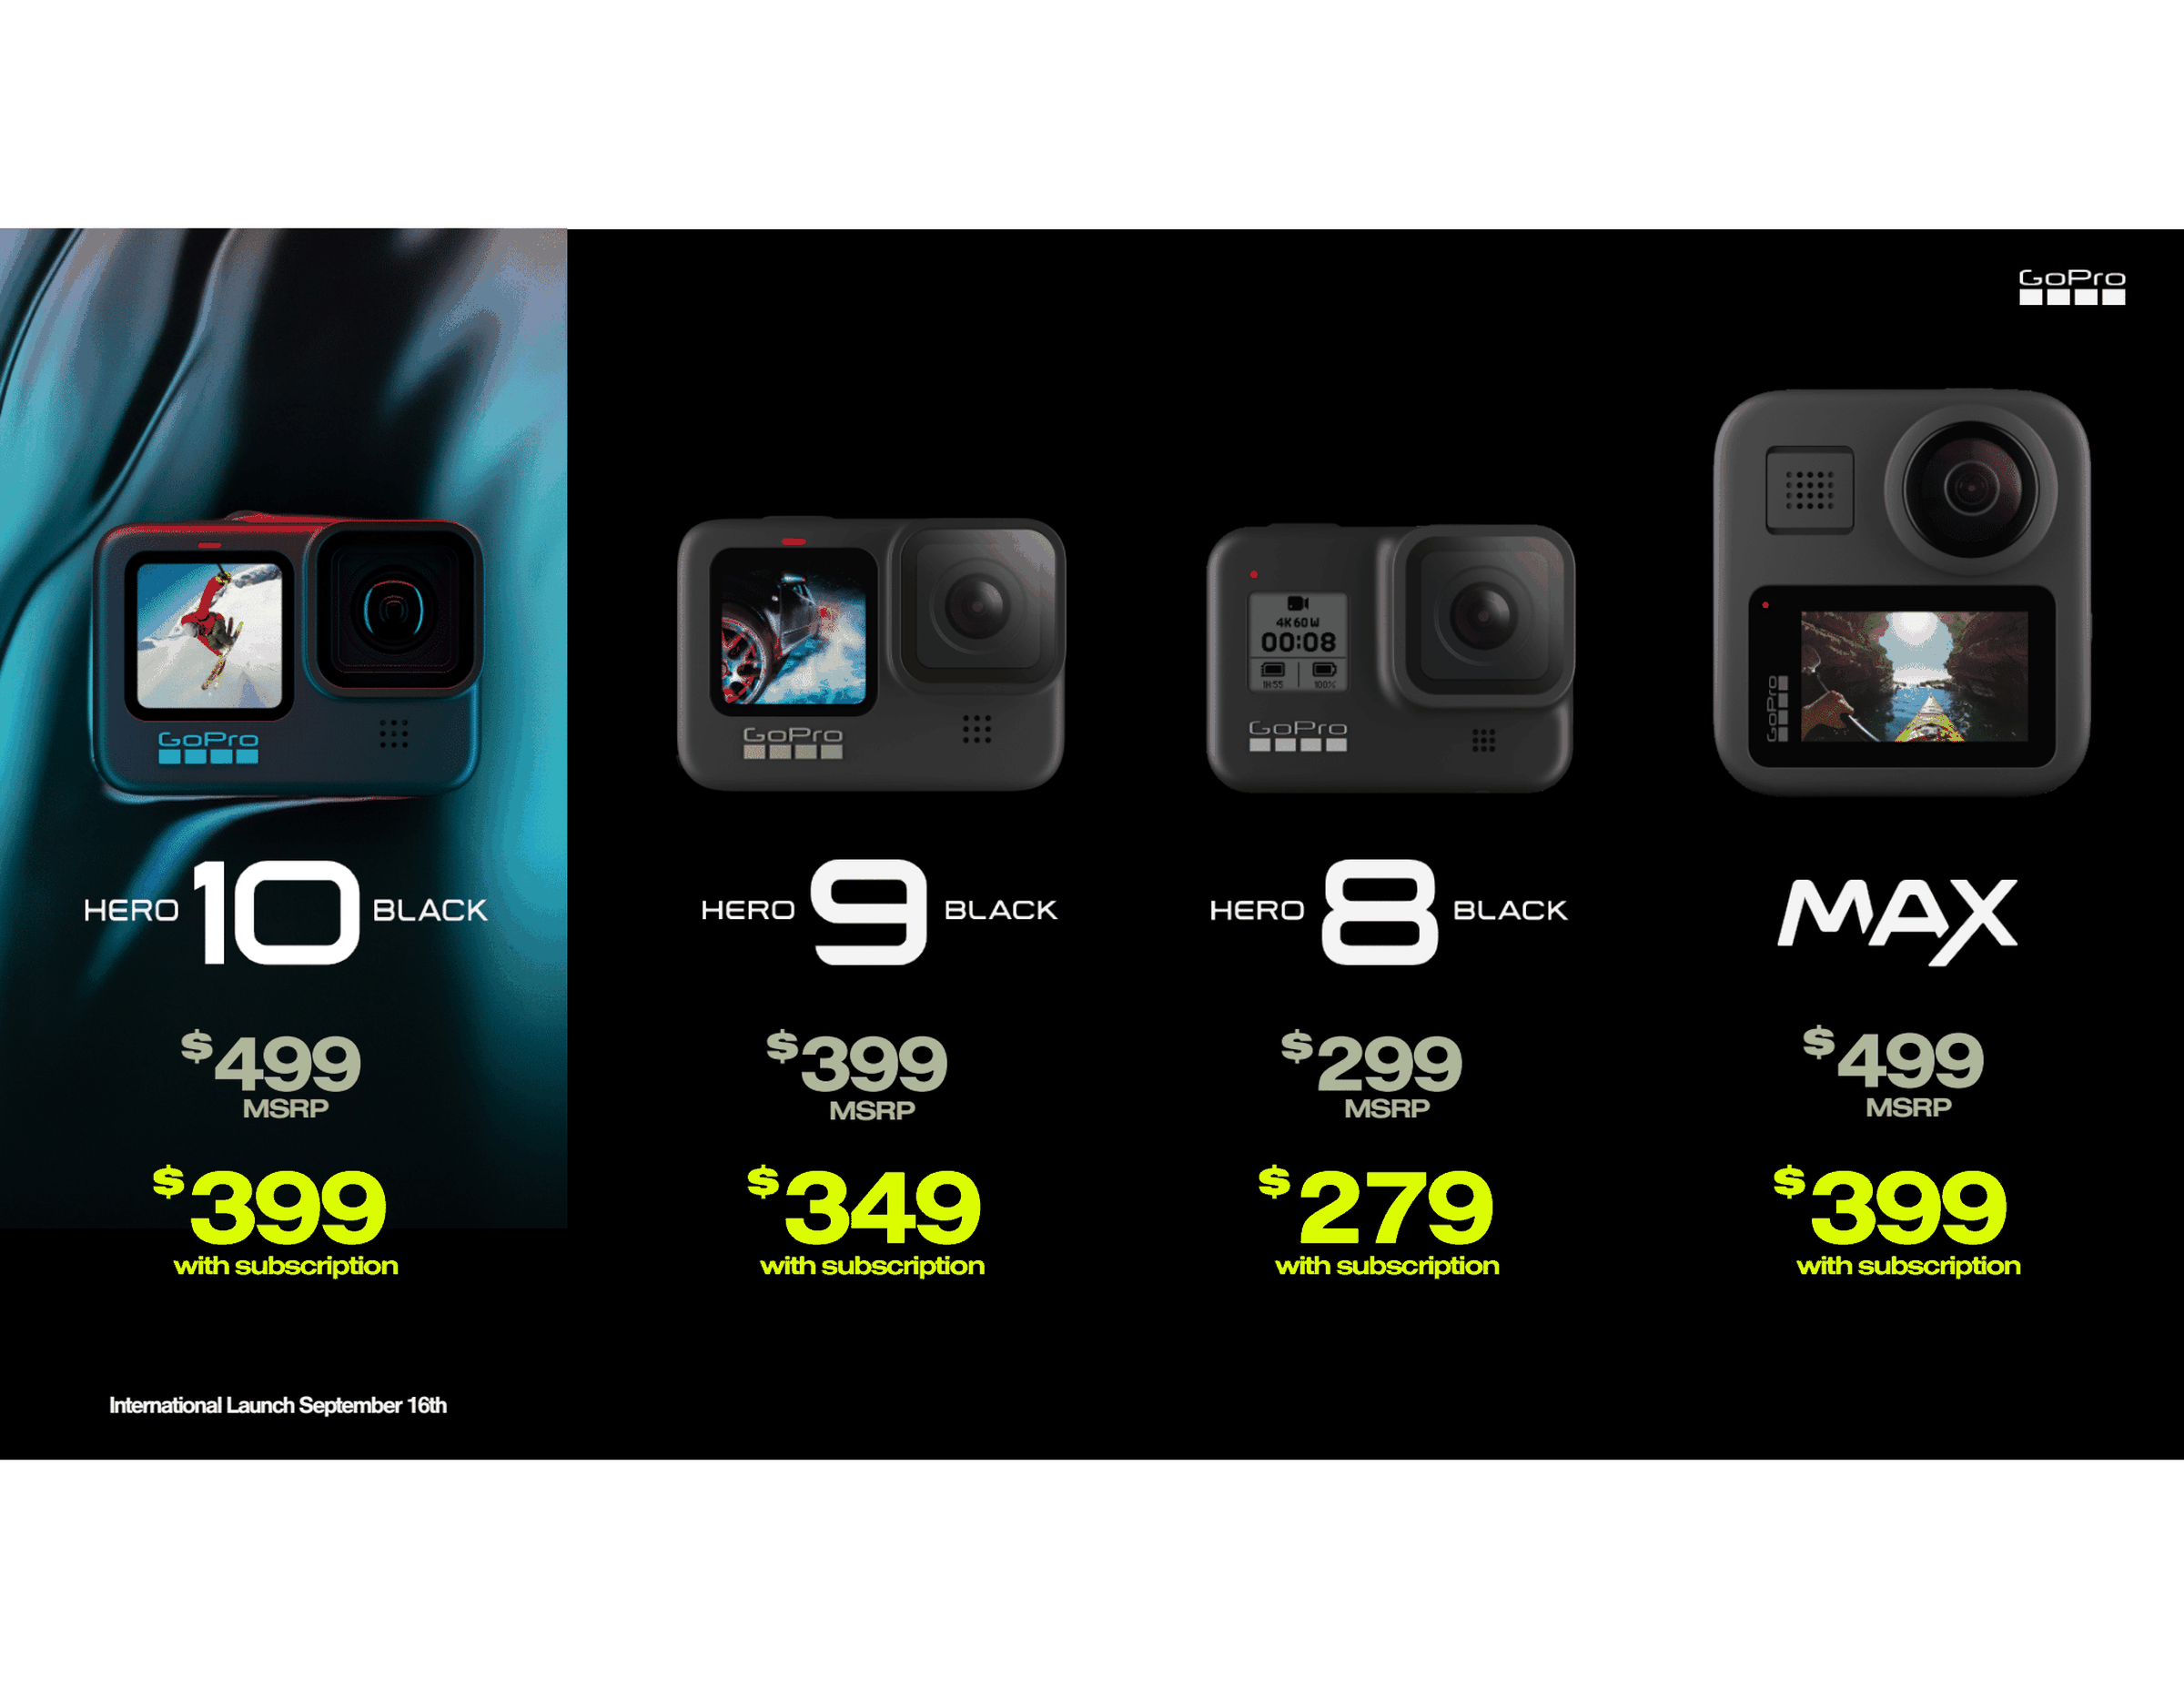 GoPro continues to push its subscription by offering discounts and adding new features that rely on it.